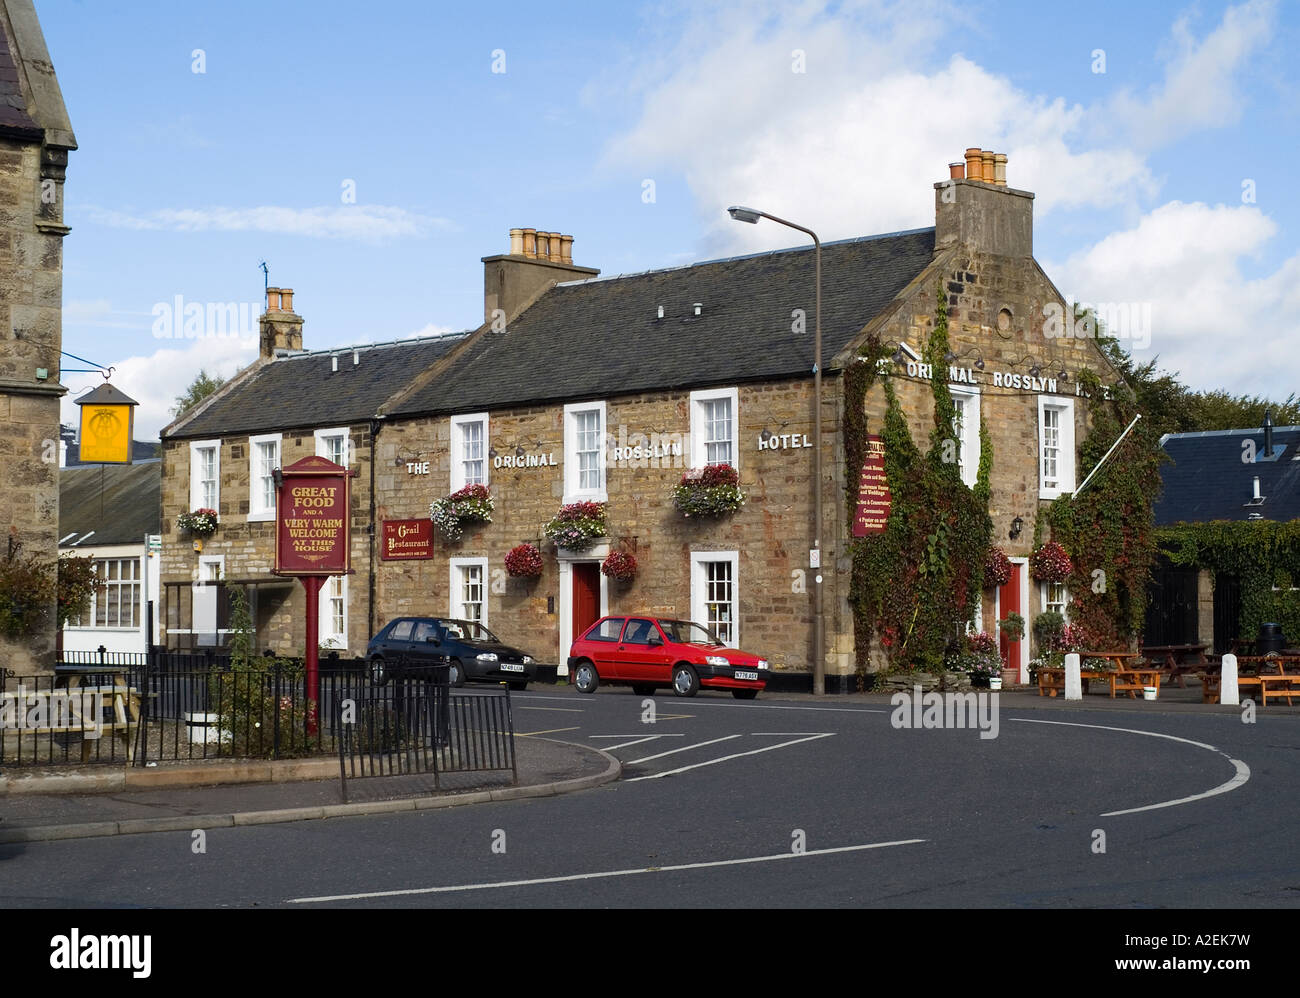 dh  ROSLIN LOTHIAN The Original Rosslyn Hotel and village road Stock Photo